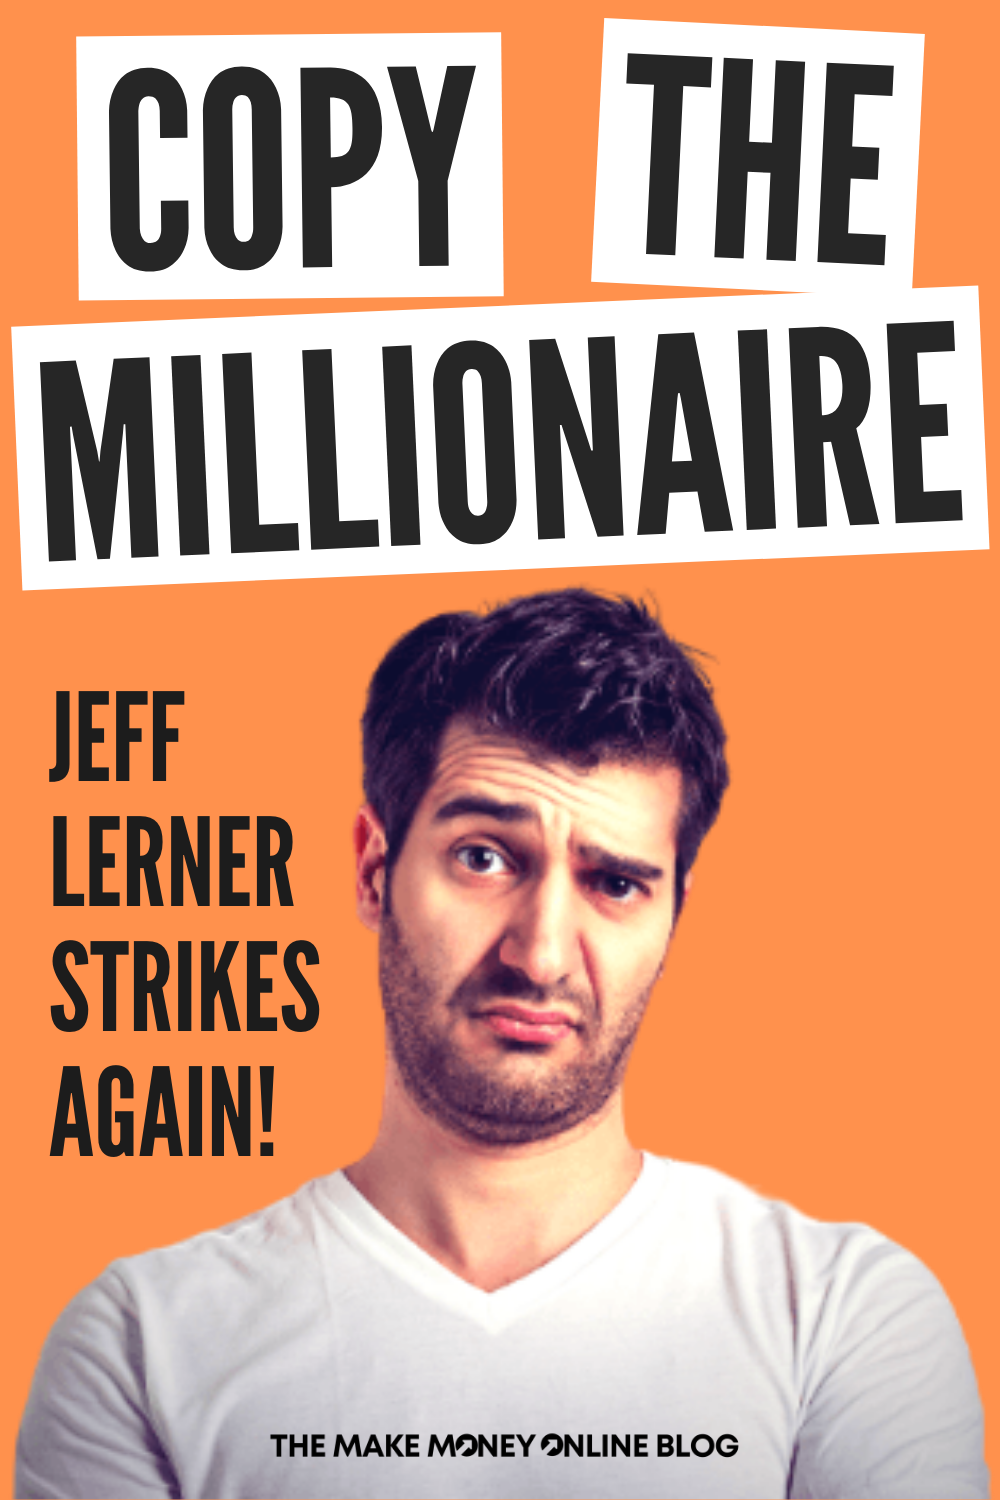 Copy The Millionaire Review (Jeff Lerner) - Is This And Class With Jeff   - Easy webinar, Affiliate network, Millionaire